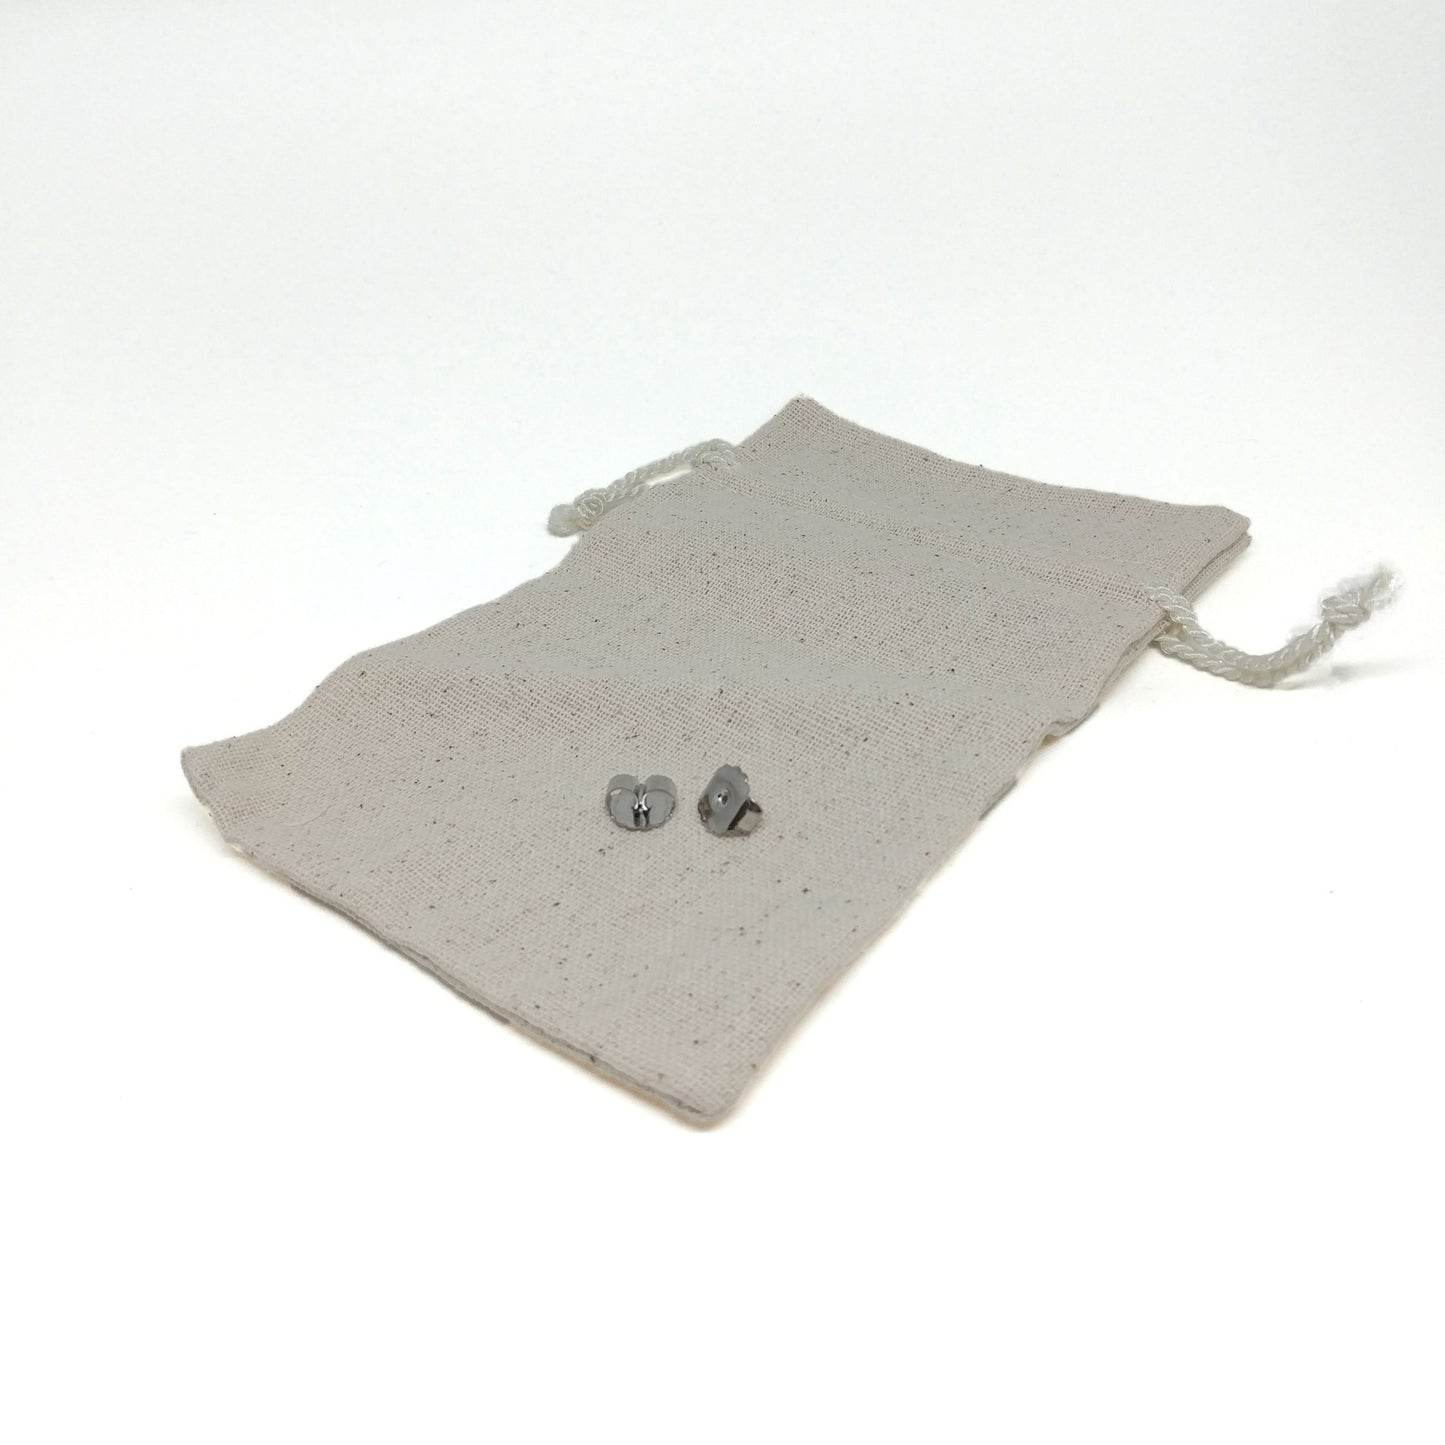 Standard Earring Accessories | Natural Linen Bag and Recycled Sterling Silver Earring Backs